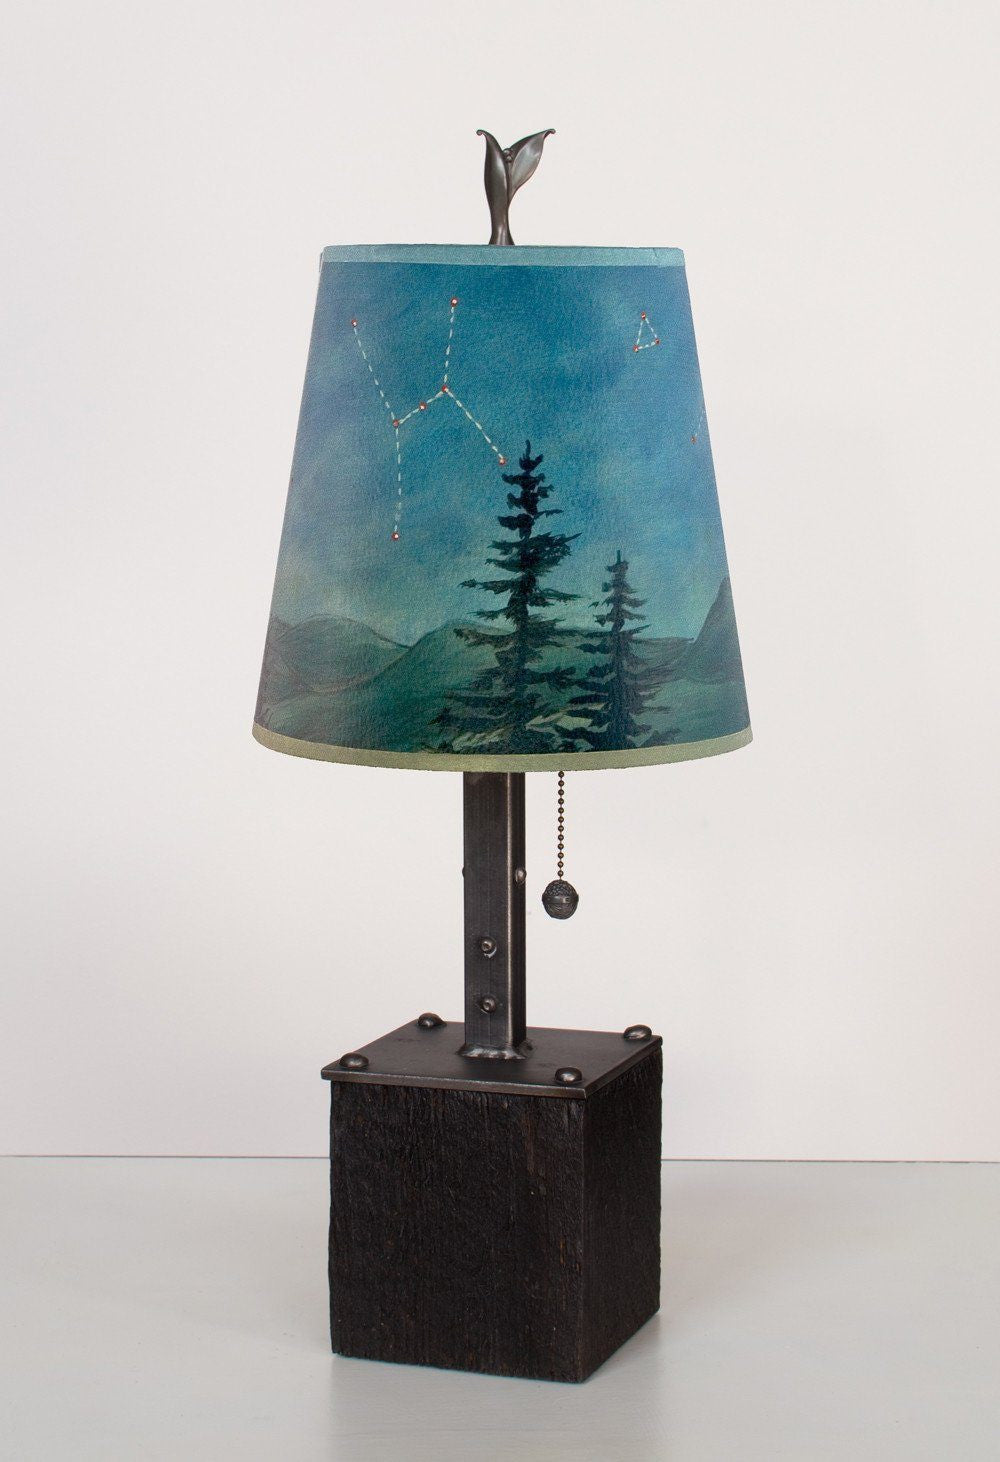 Janna Ugone &amp; Co Table Lamps Steel Table Lamp on Reclaimed Wood with Small Drum Shade in Midnight Sky